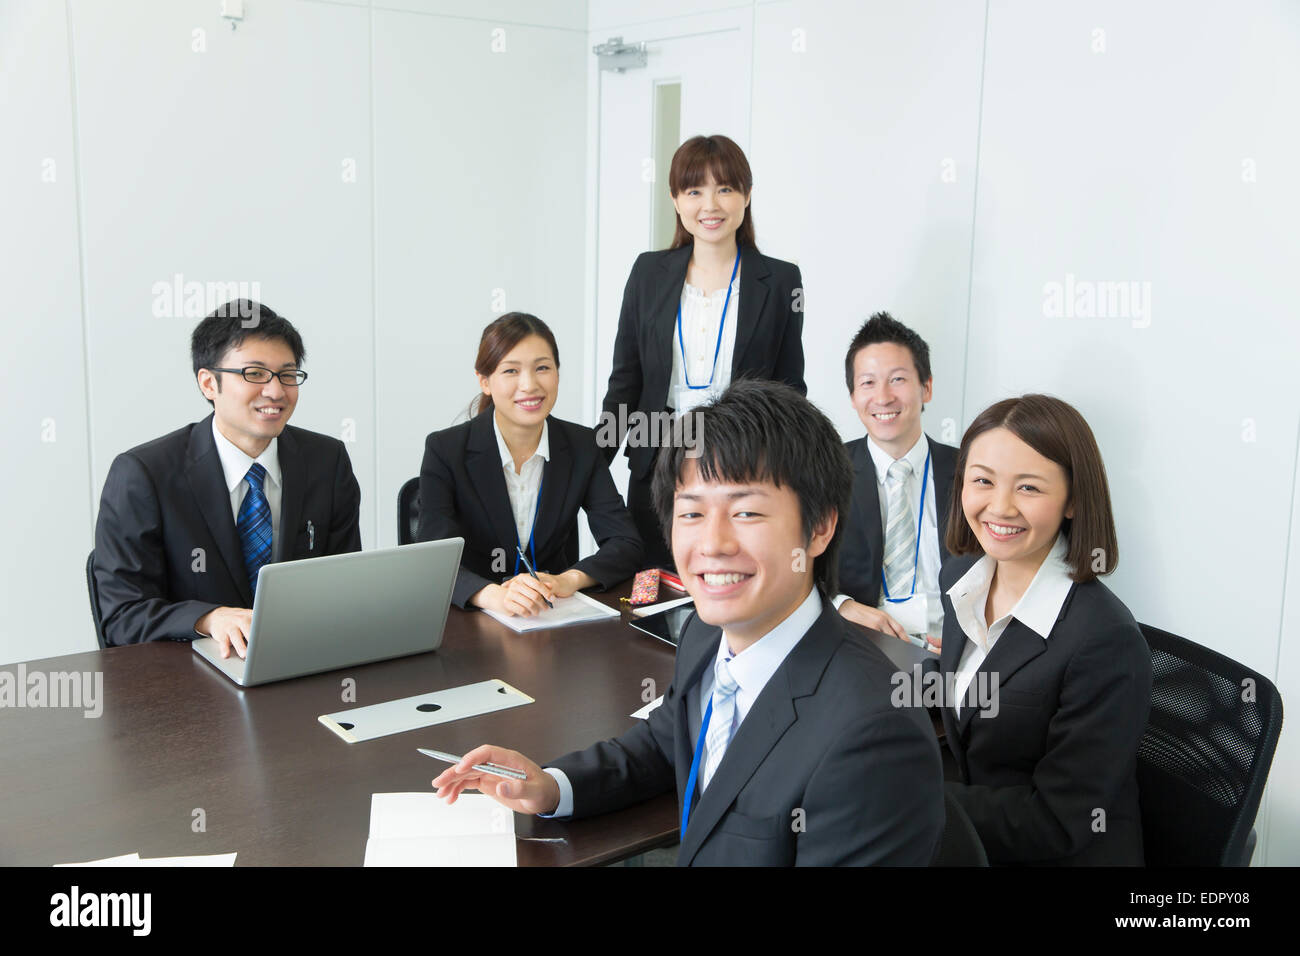 Business People in Meeting and Looking at Camera Stock Photo